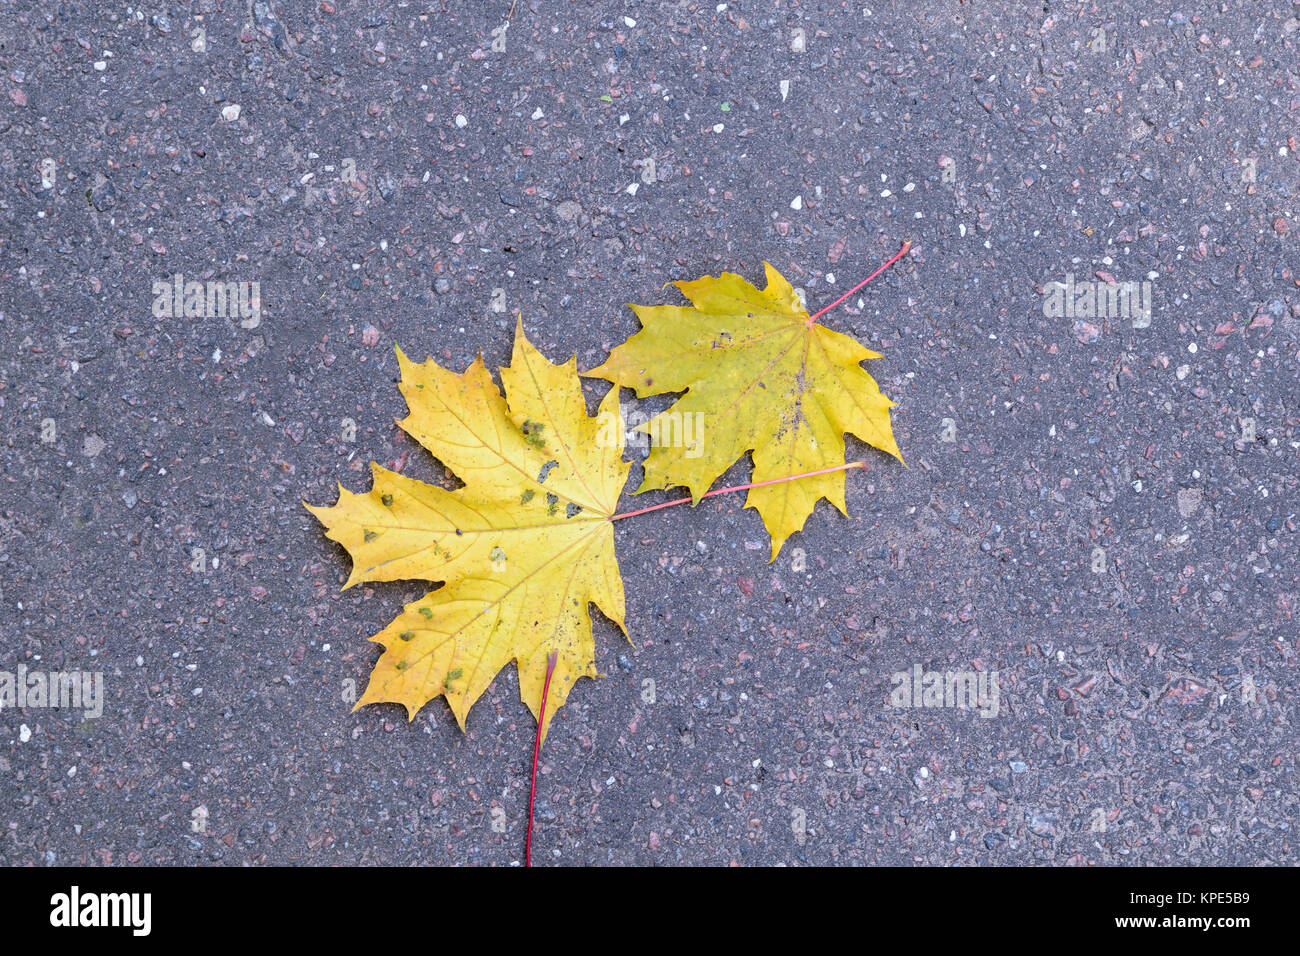 Two yellow autumn maple leaves lie on the asphalt pavement Stock Photo